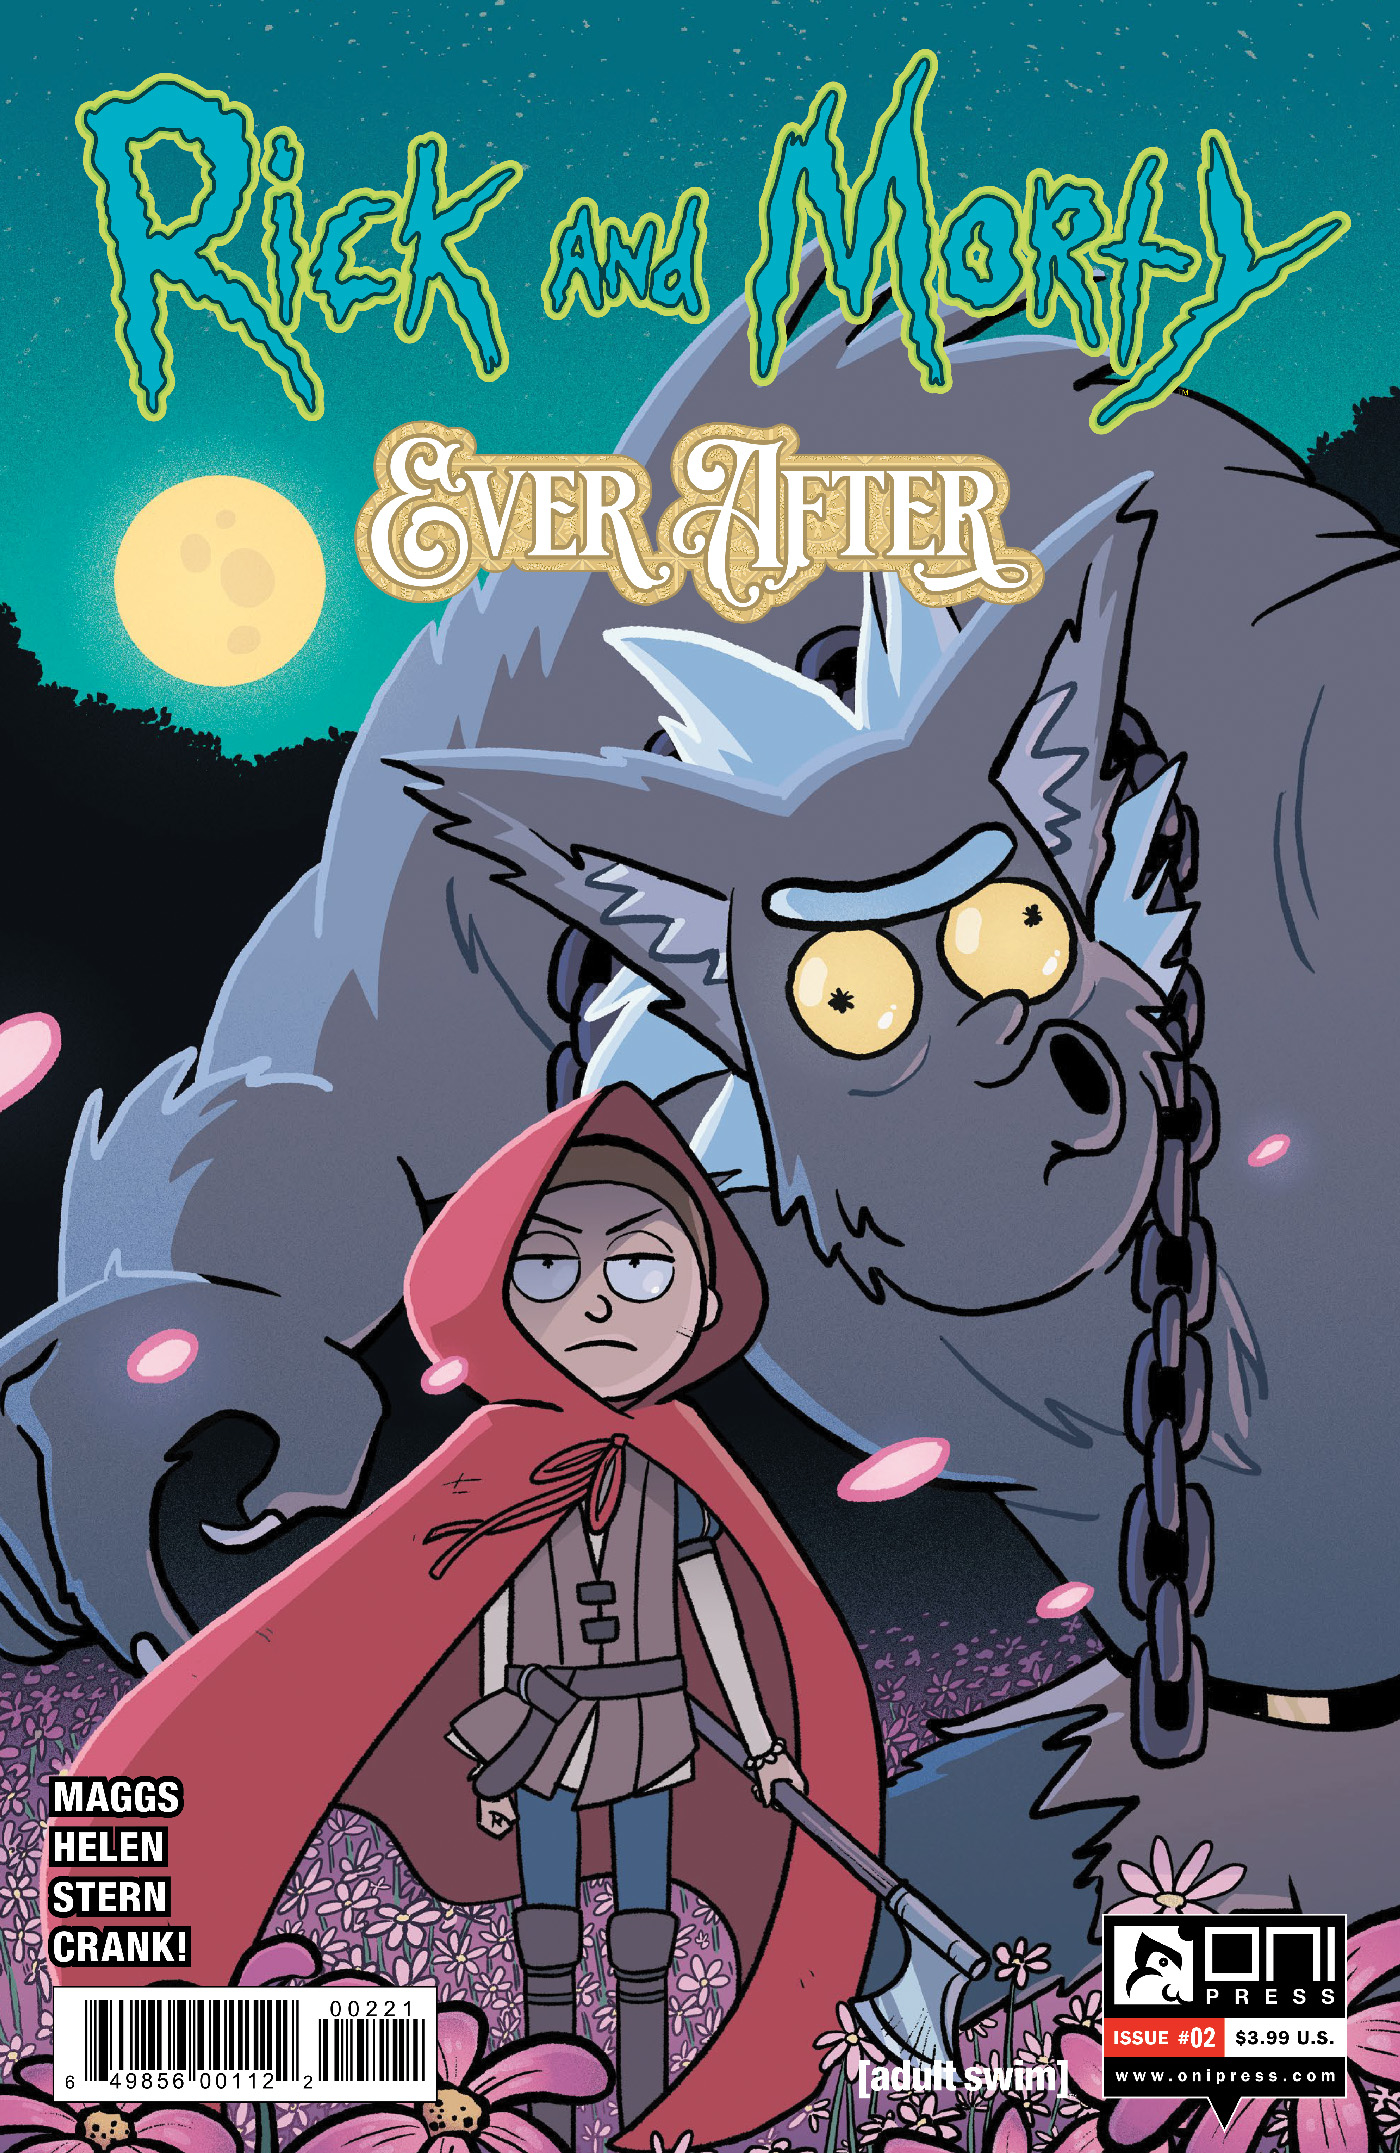 Rick and Morty Ever After #2 Cover B Stern